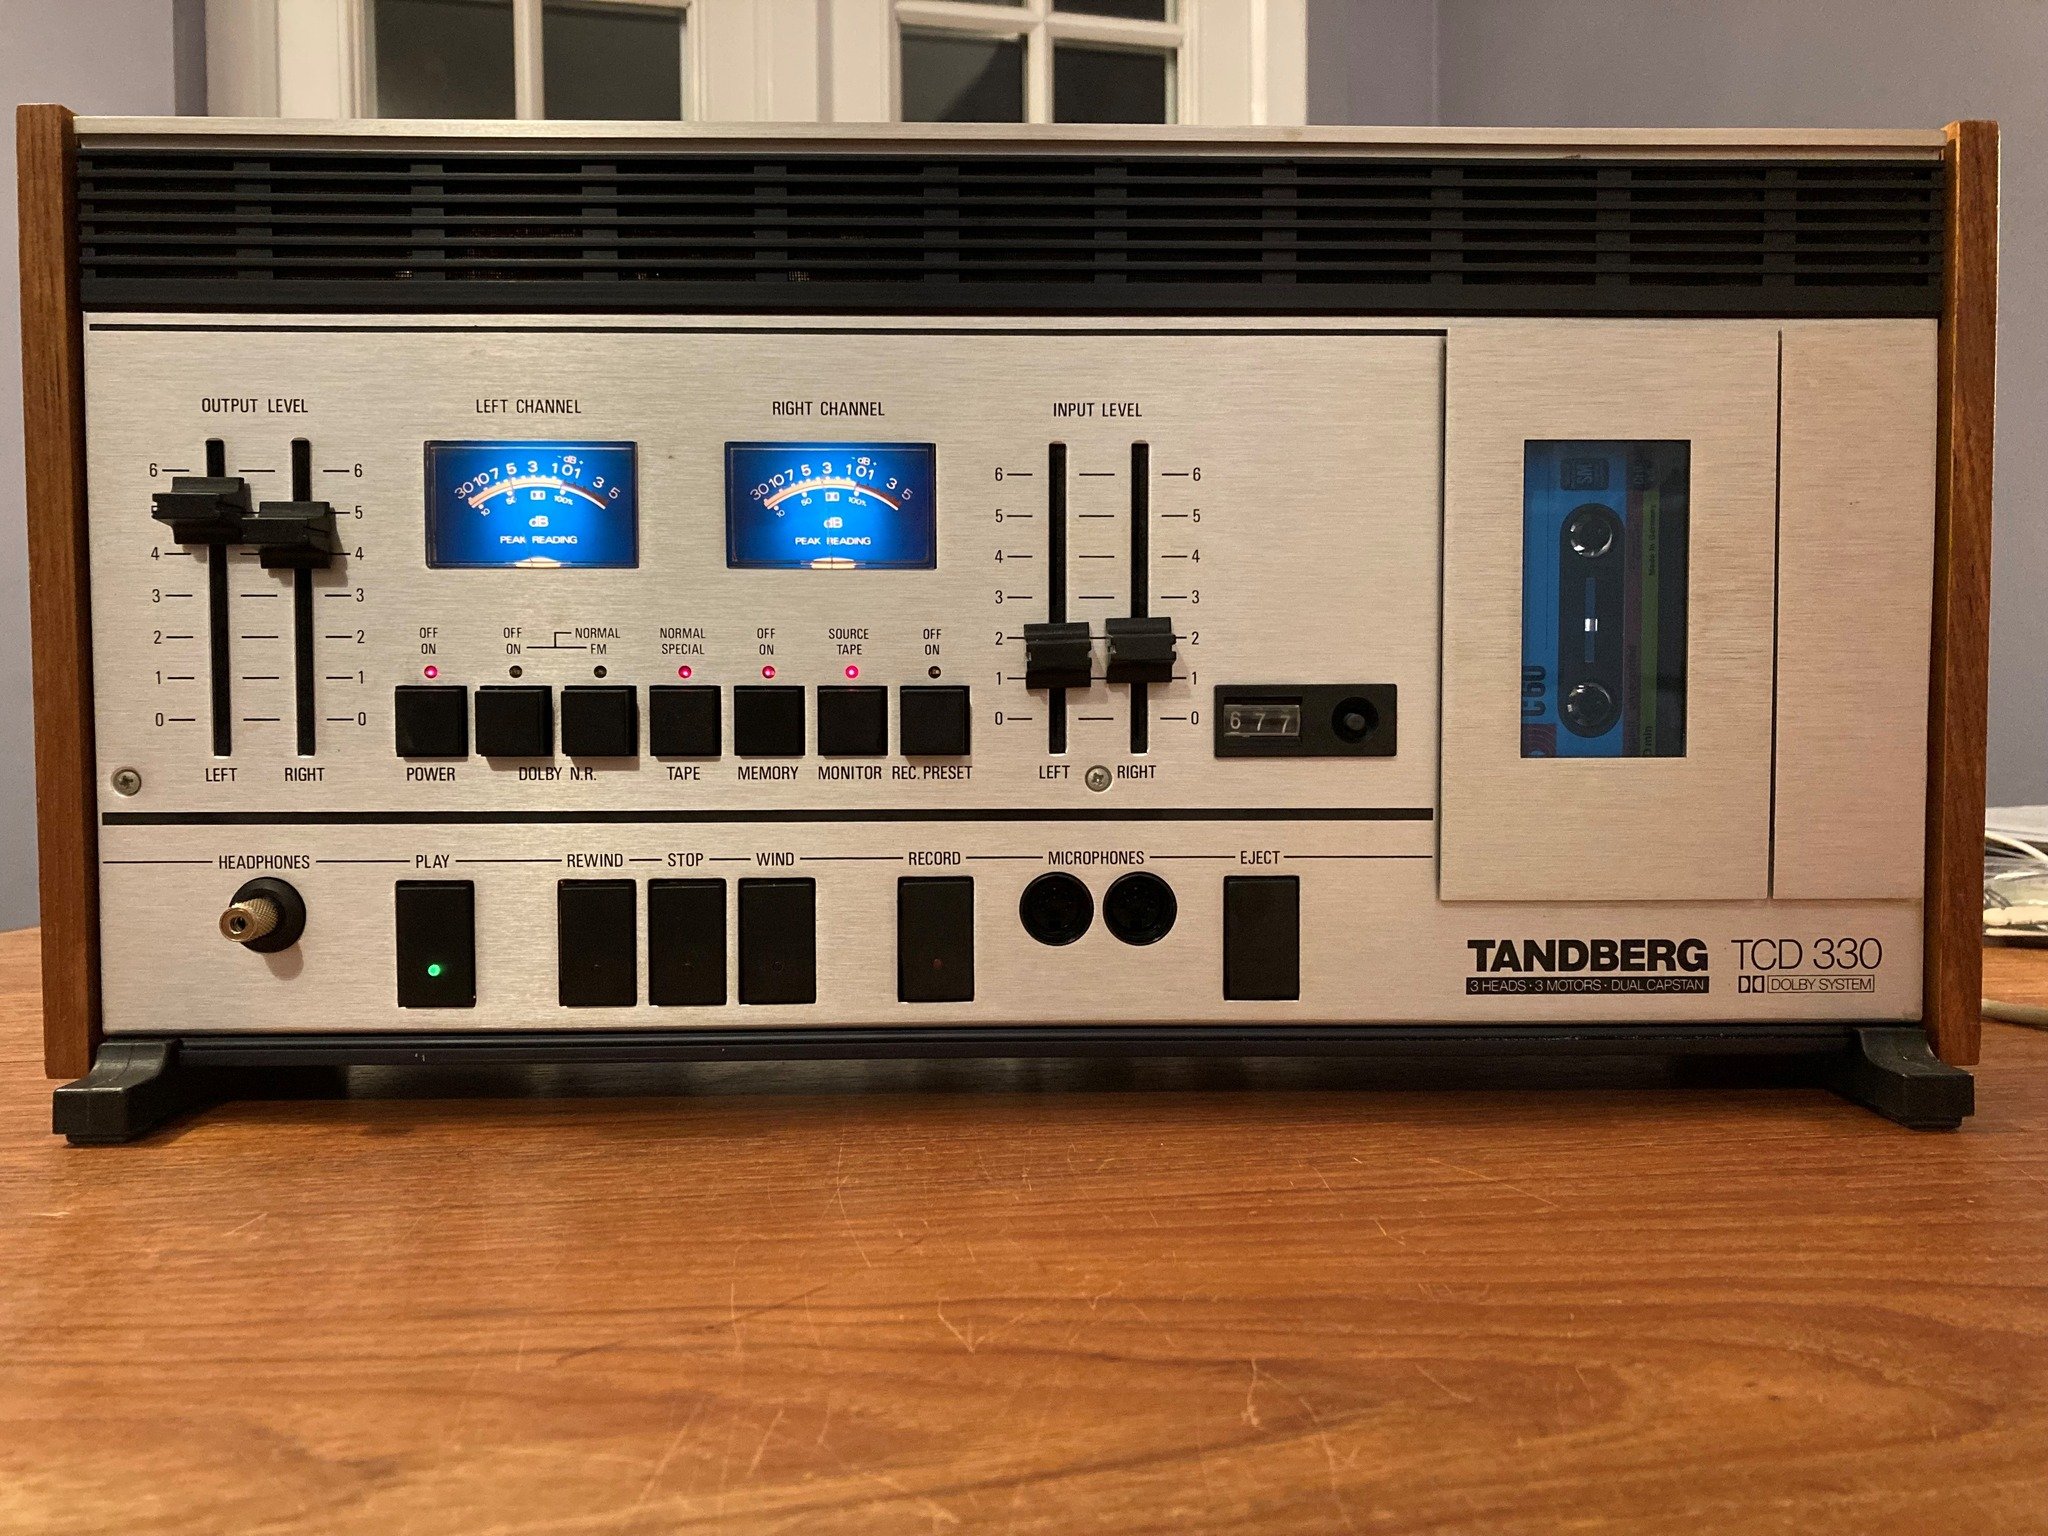 Made in the 70's on X: Tandberg TCD 330 (1976) 3-head compact